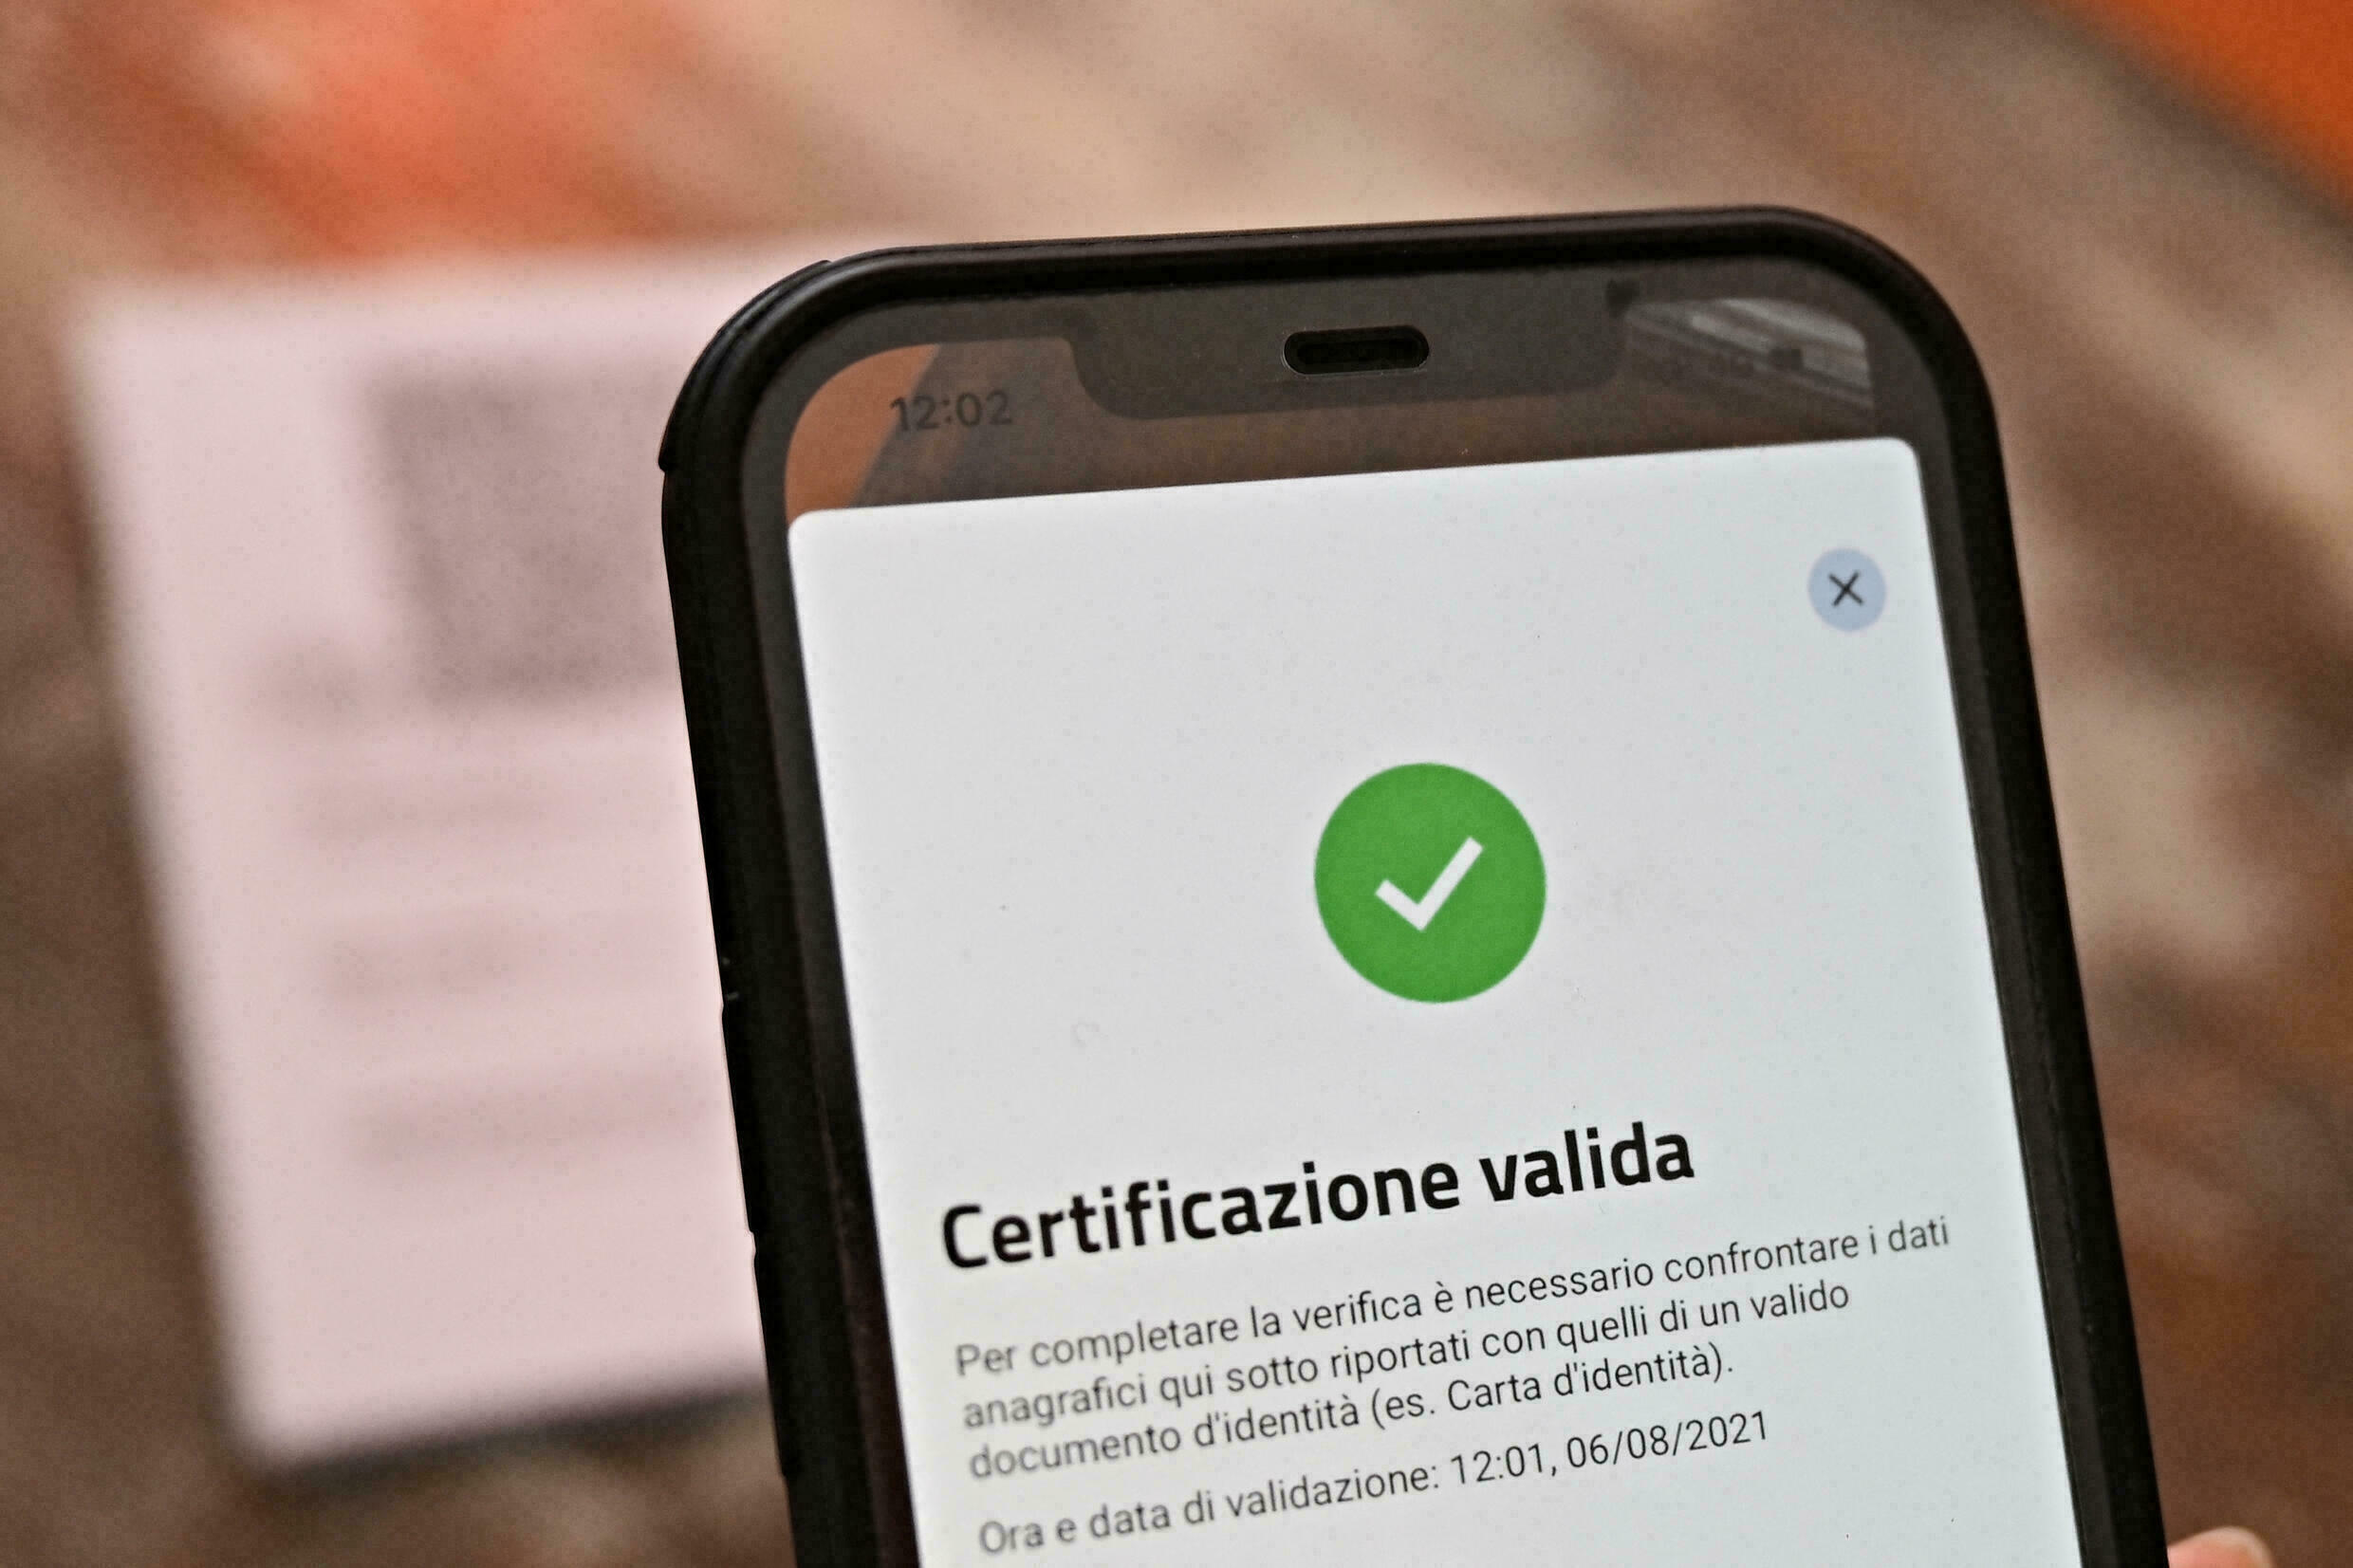 A smartphone screen showing the Italian green pass for Covid-19 vaccination.